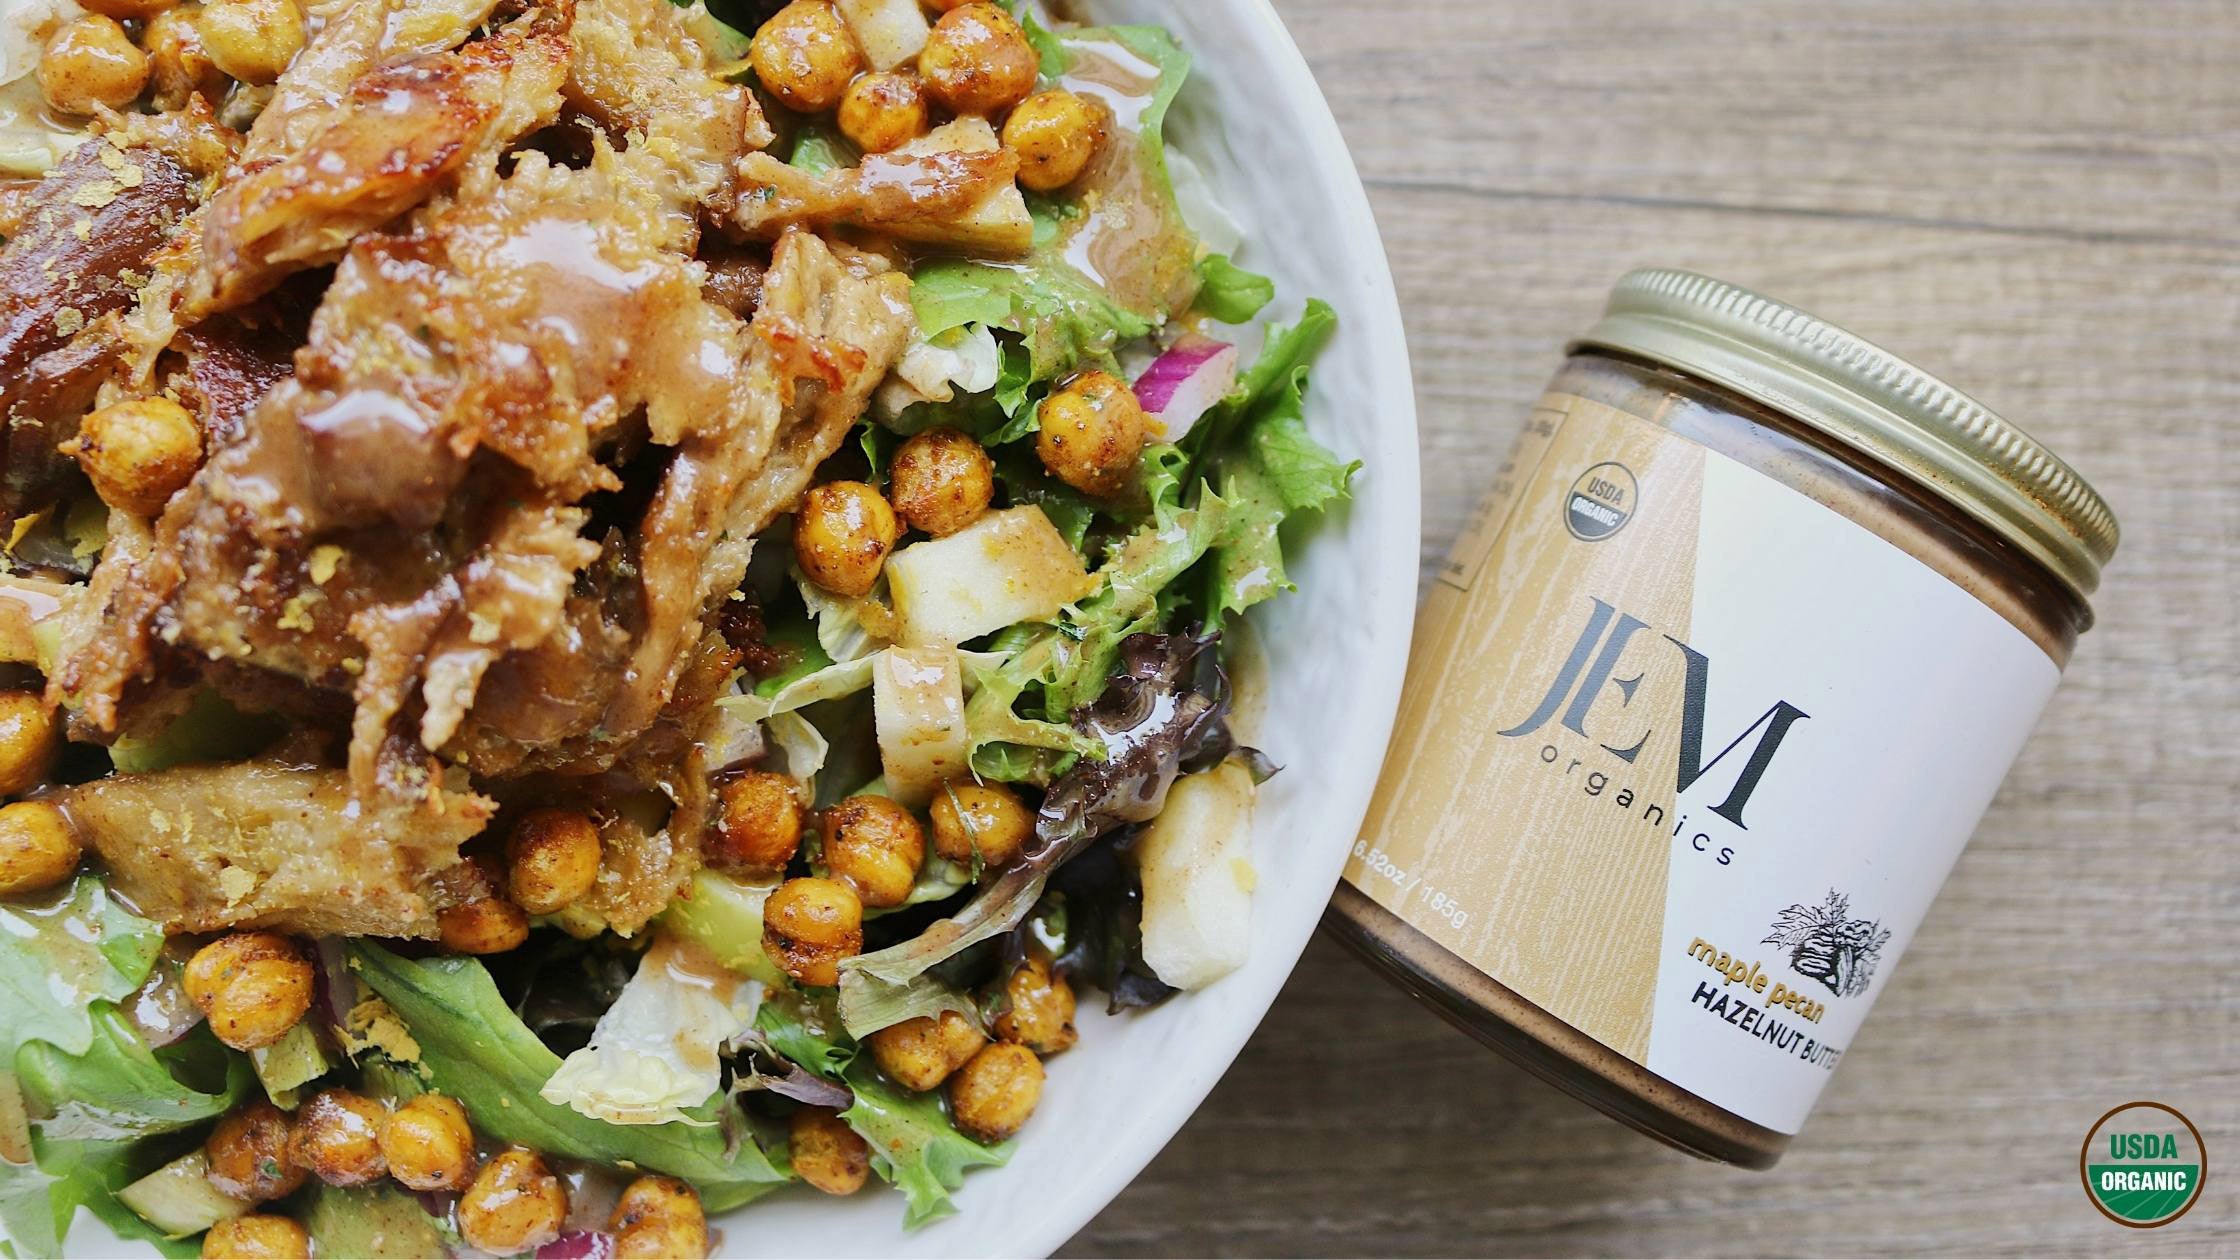 Salad topped with chickpeas, seitan and maple pecan dressing